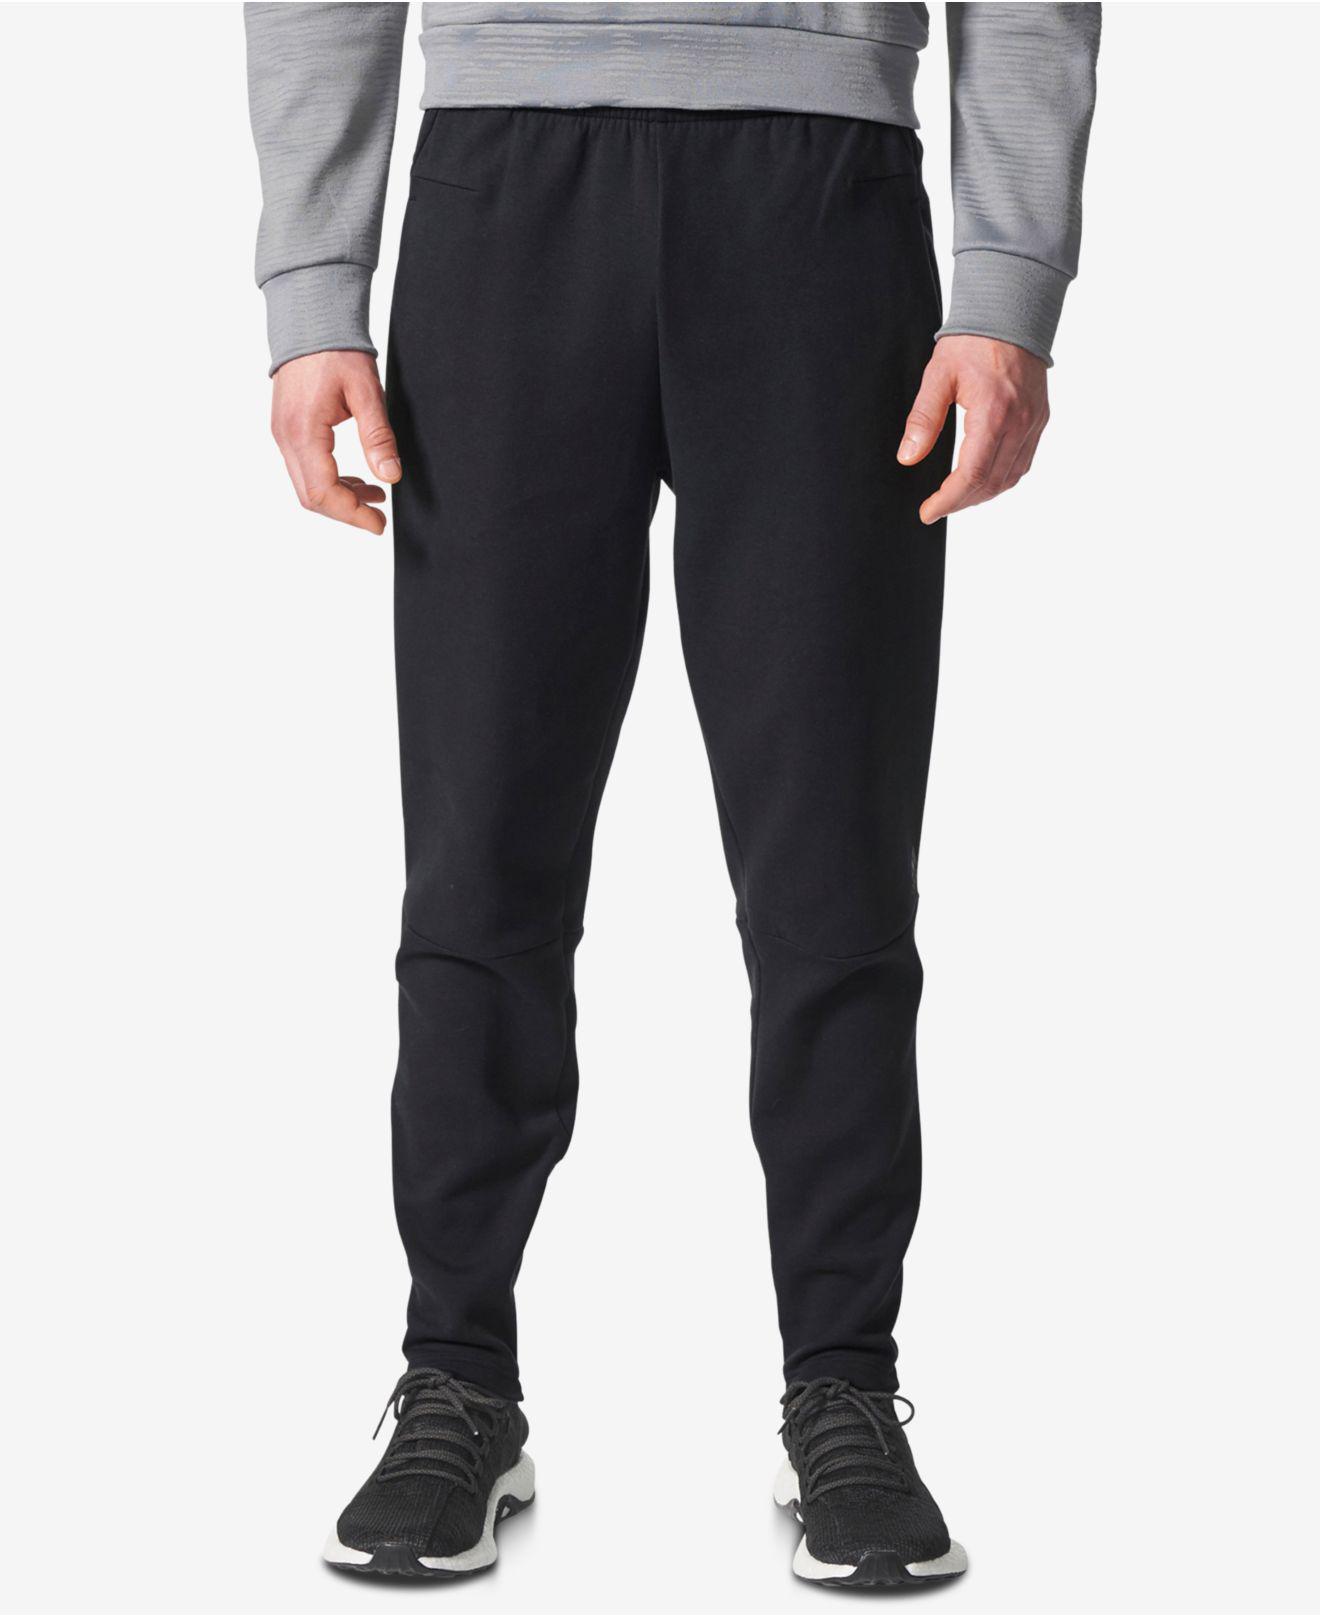 adidas Cotton Men's Zne Tapered Pants in Black for Men - Lyst